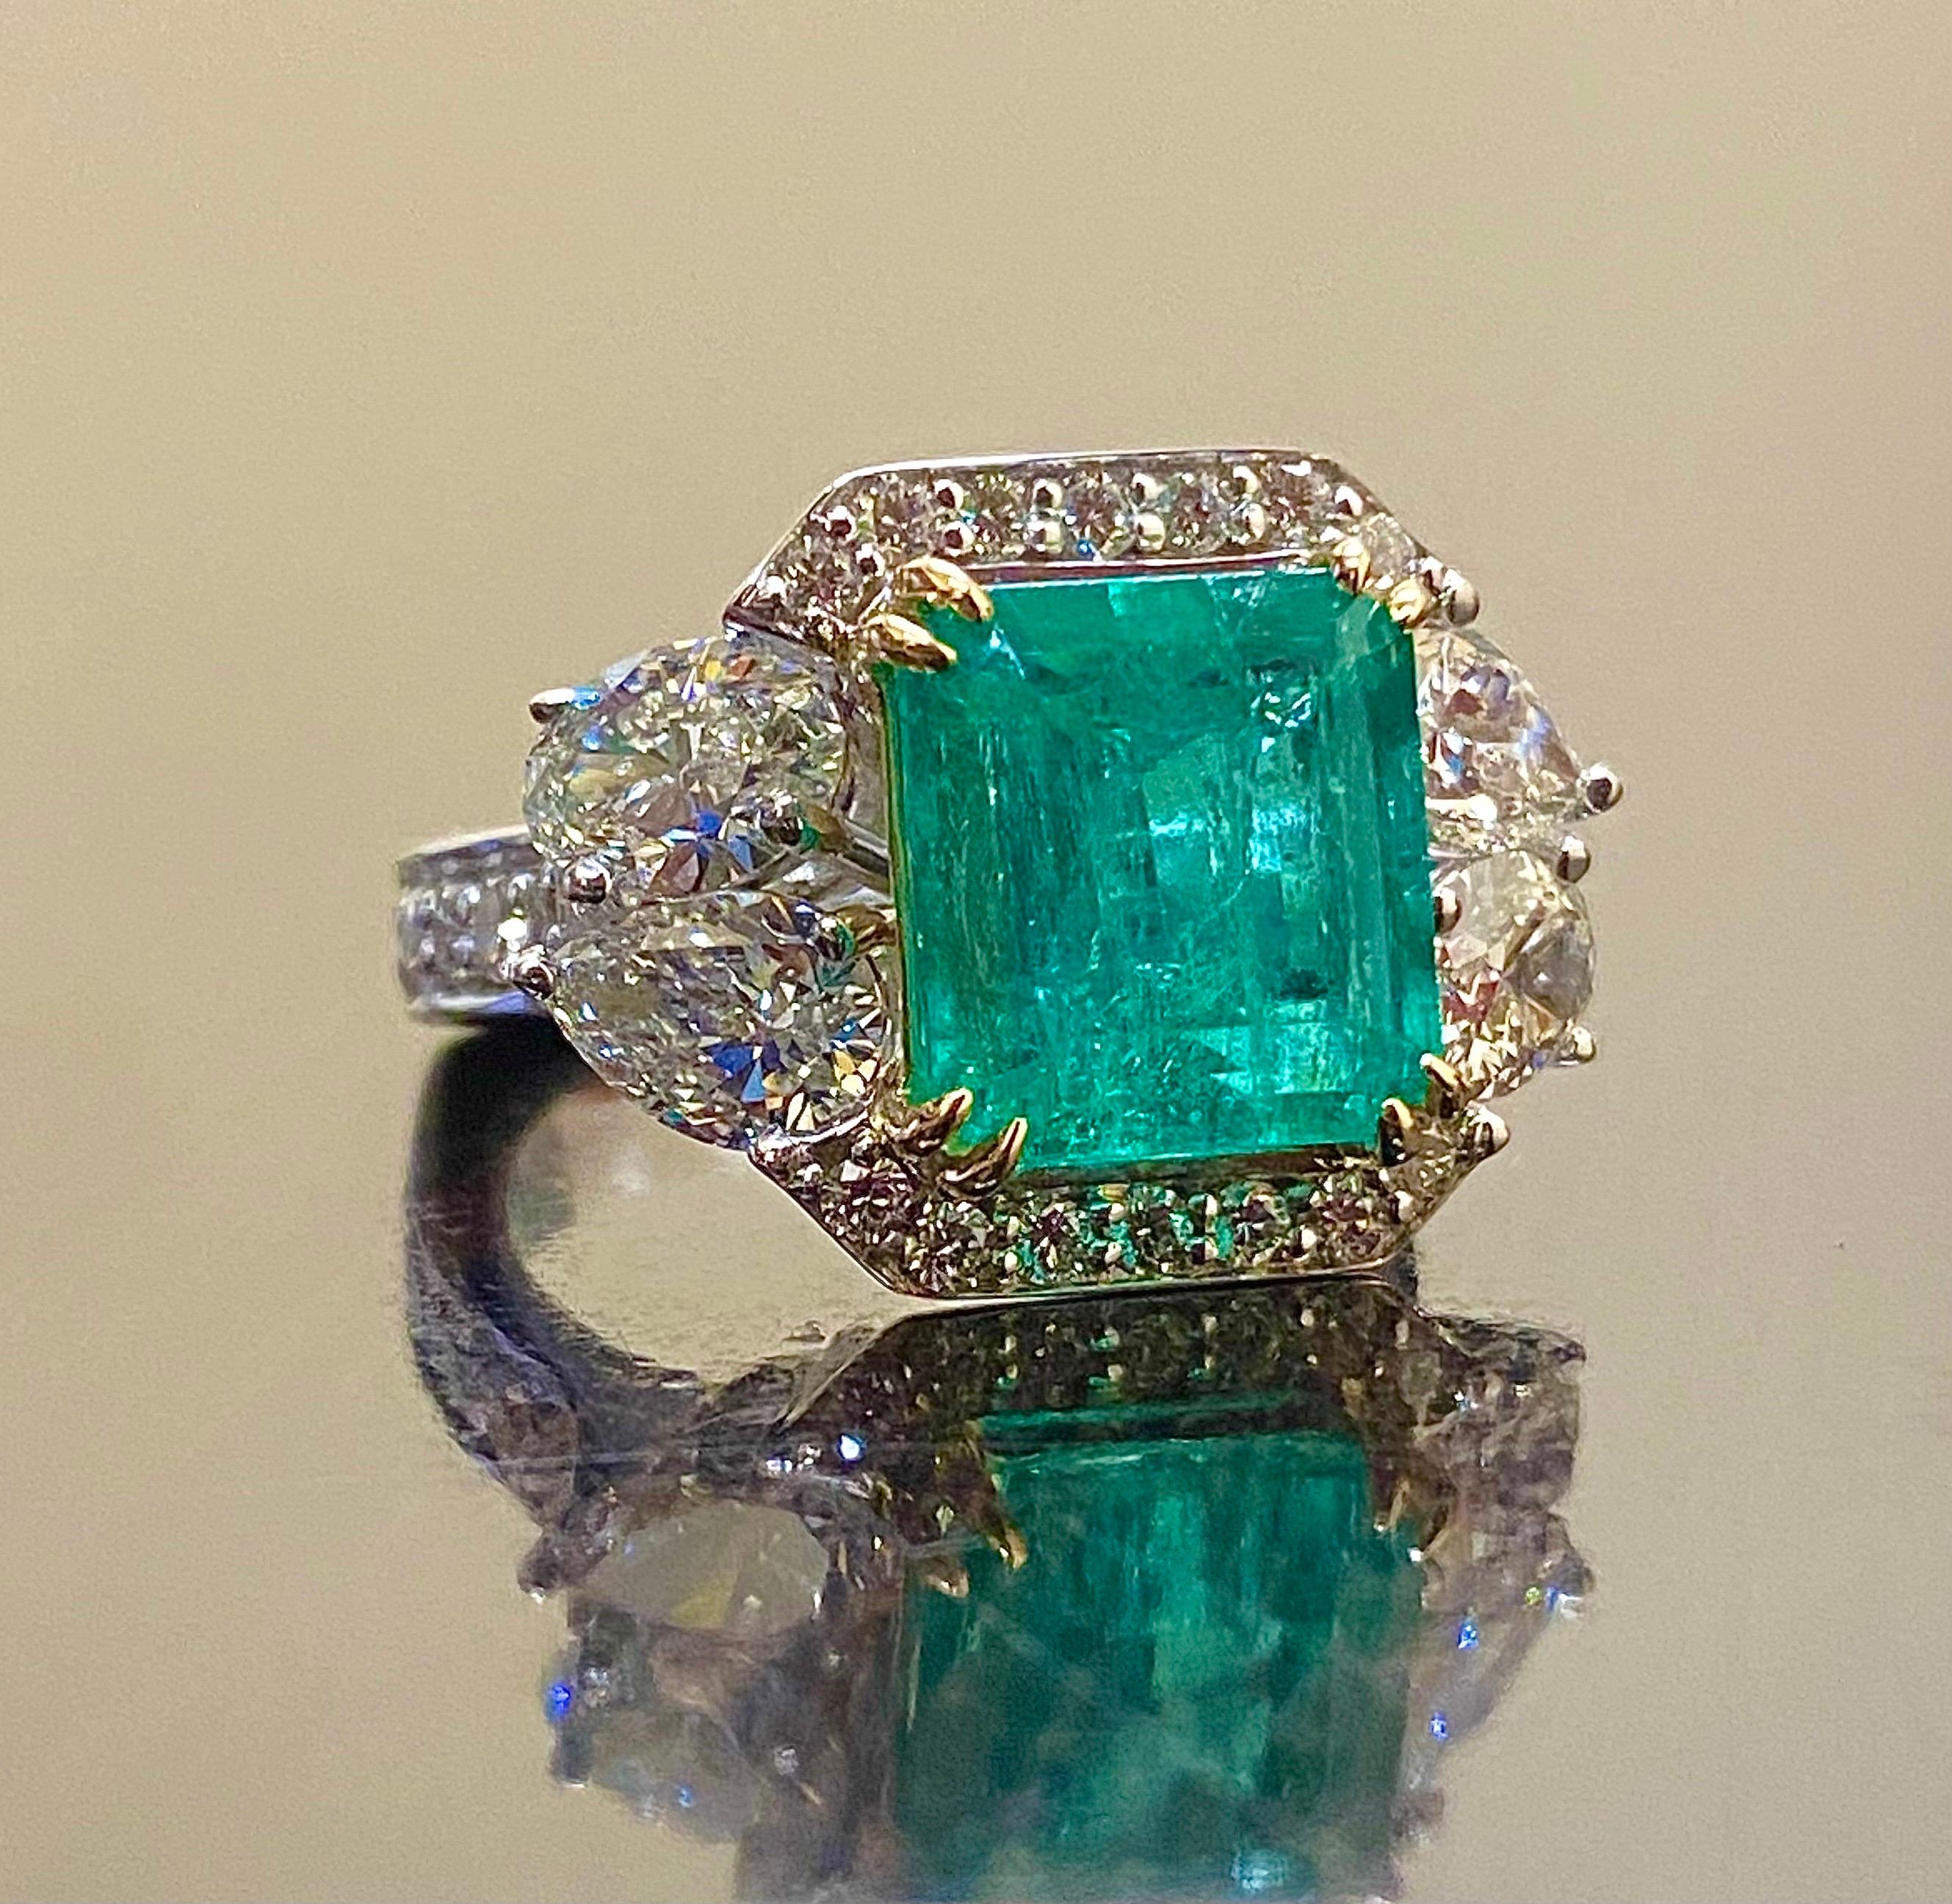 18K White Gold GIA Certified 4.87 Carat Colombian Emerald Diamond Ring For Sale 5